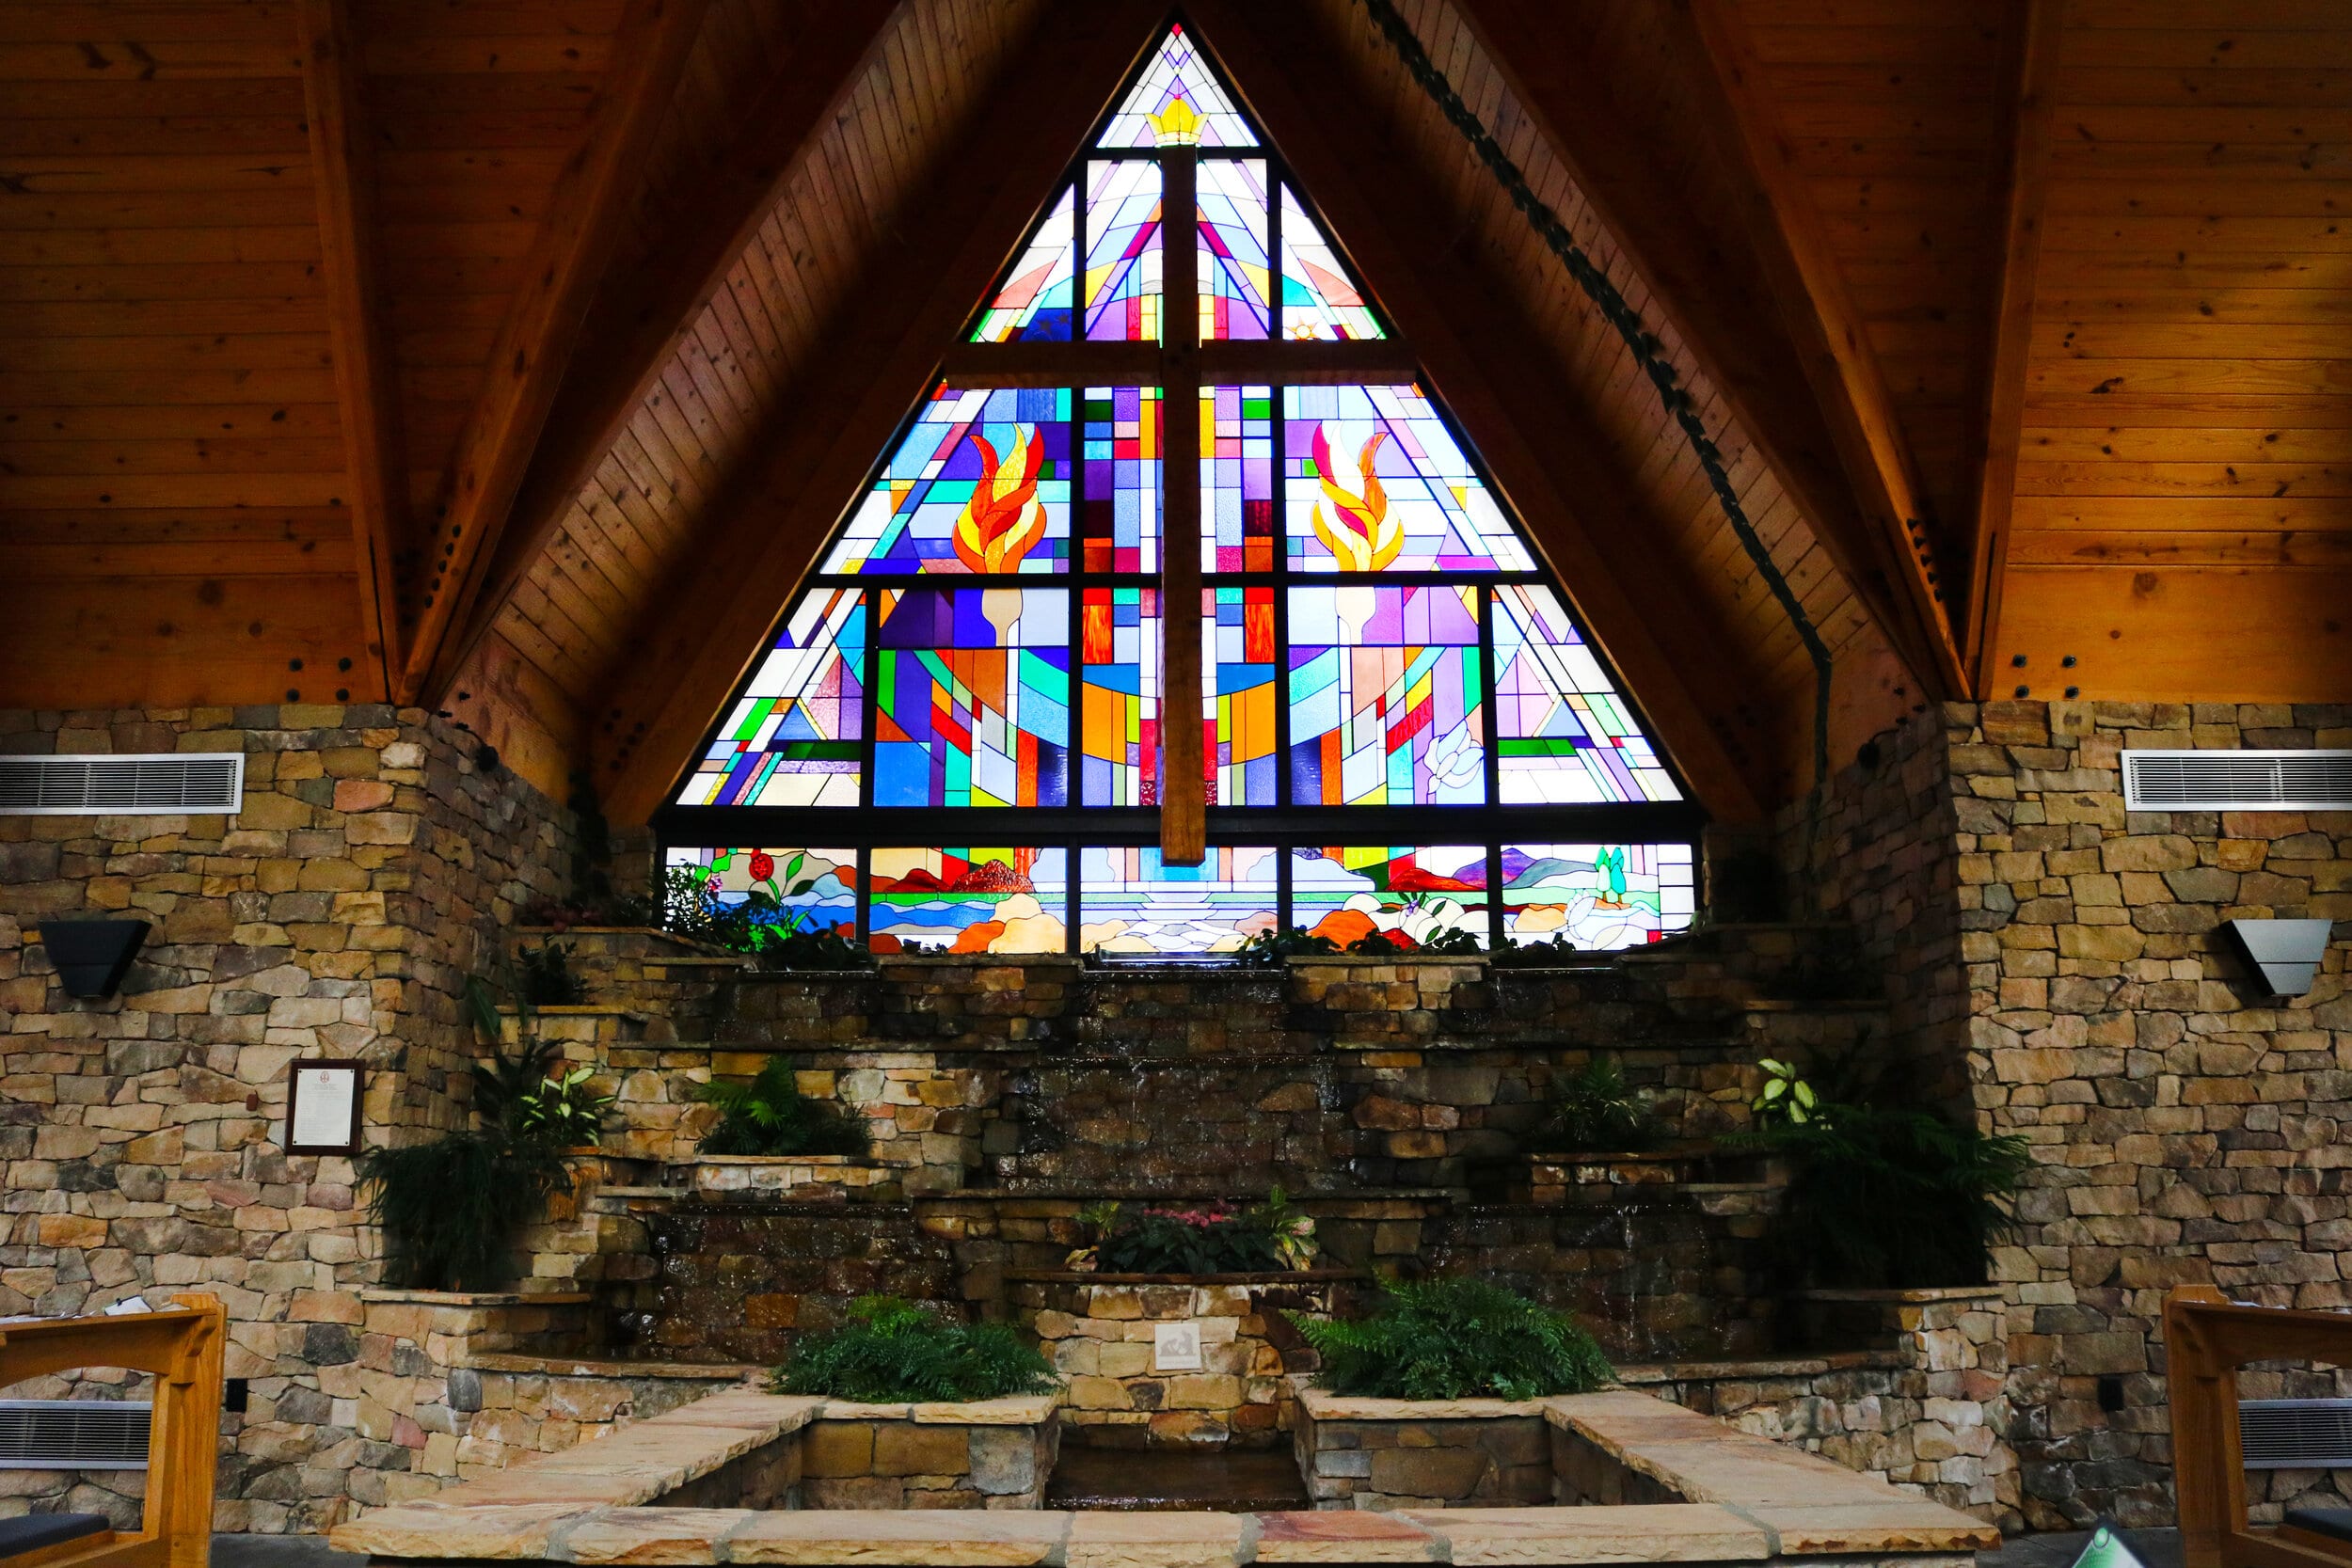 The north wall with the stained glass window, as well as the rock wall with the waterfall.